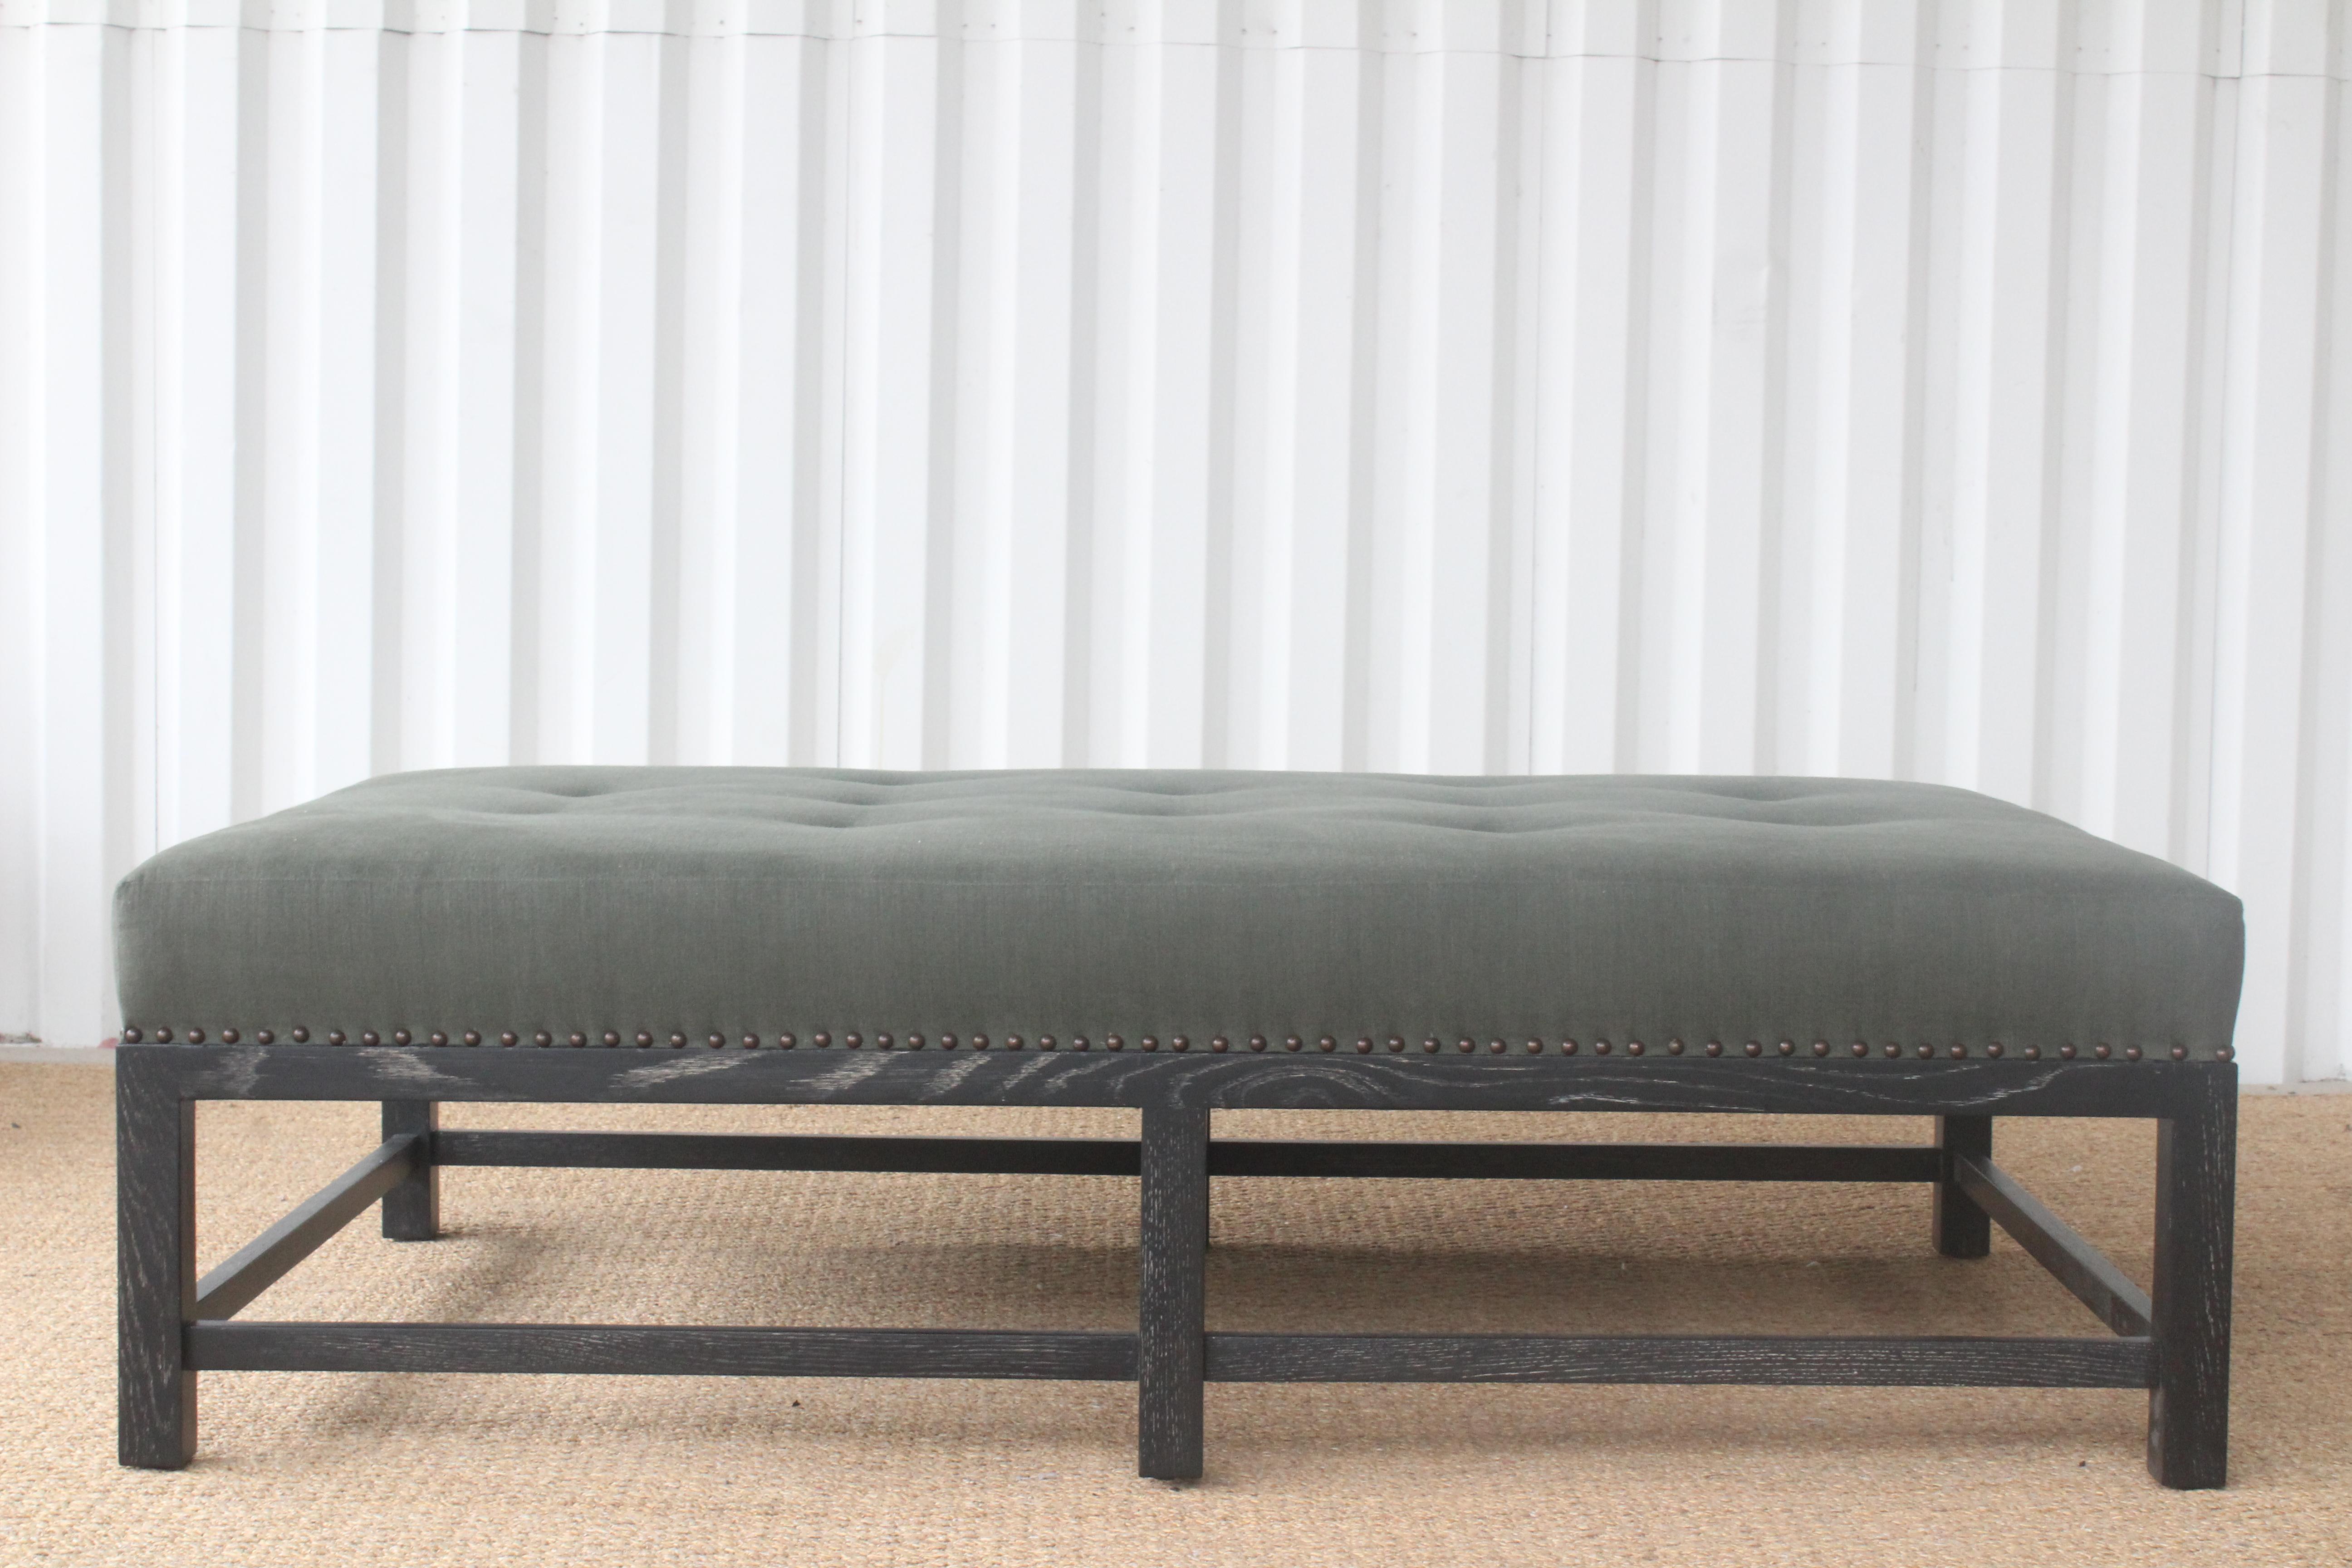 Custom made Lexington ottoman with an oak base and upholstered in a vintage dead stock vintage Belgian linen in olive green. The oak base is in a cerused satin black finish. Finished with antique brass nailhead trim. Handmade in Los Angeles.